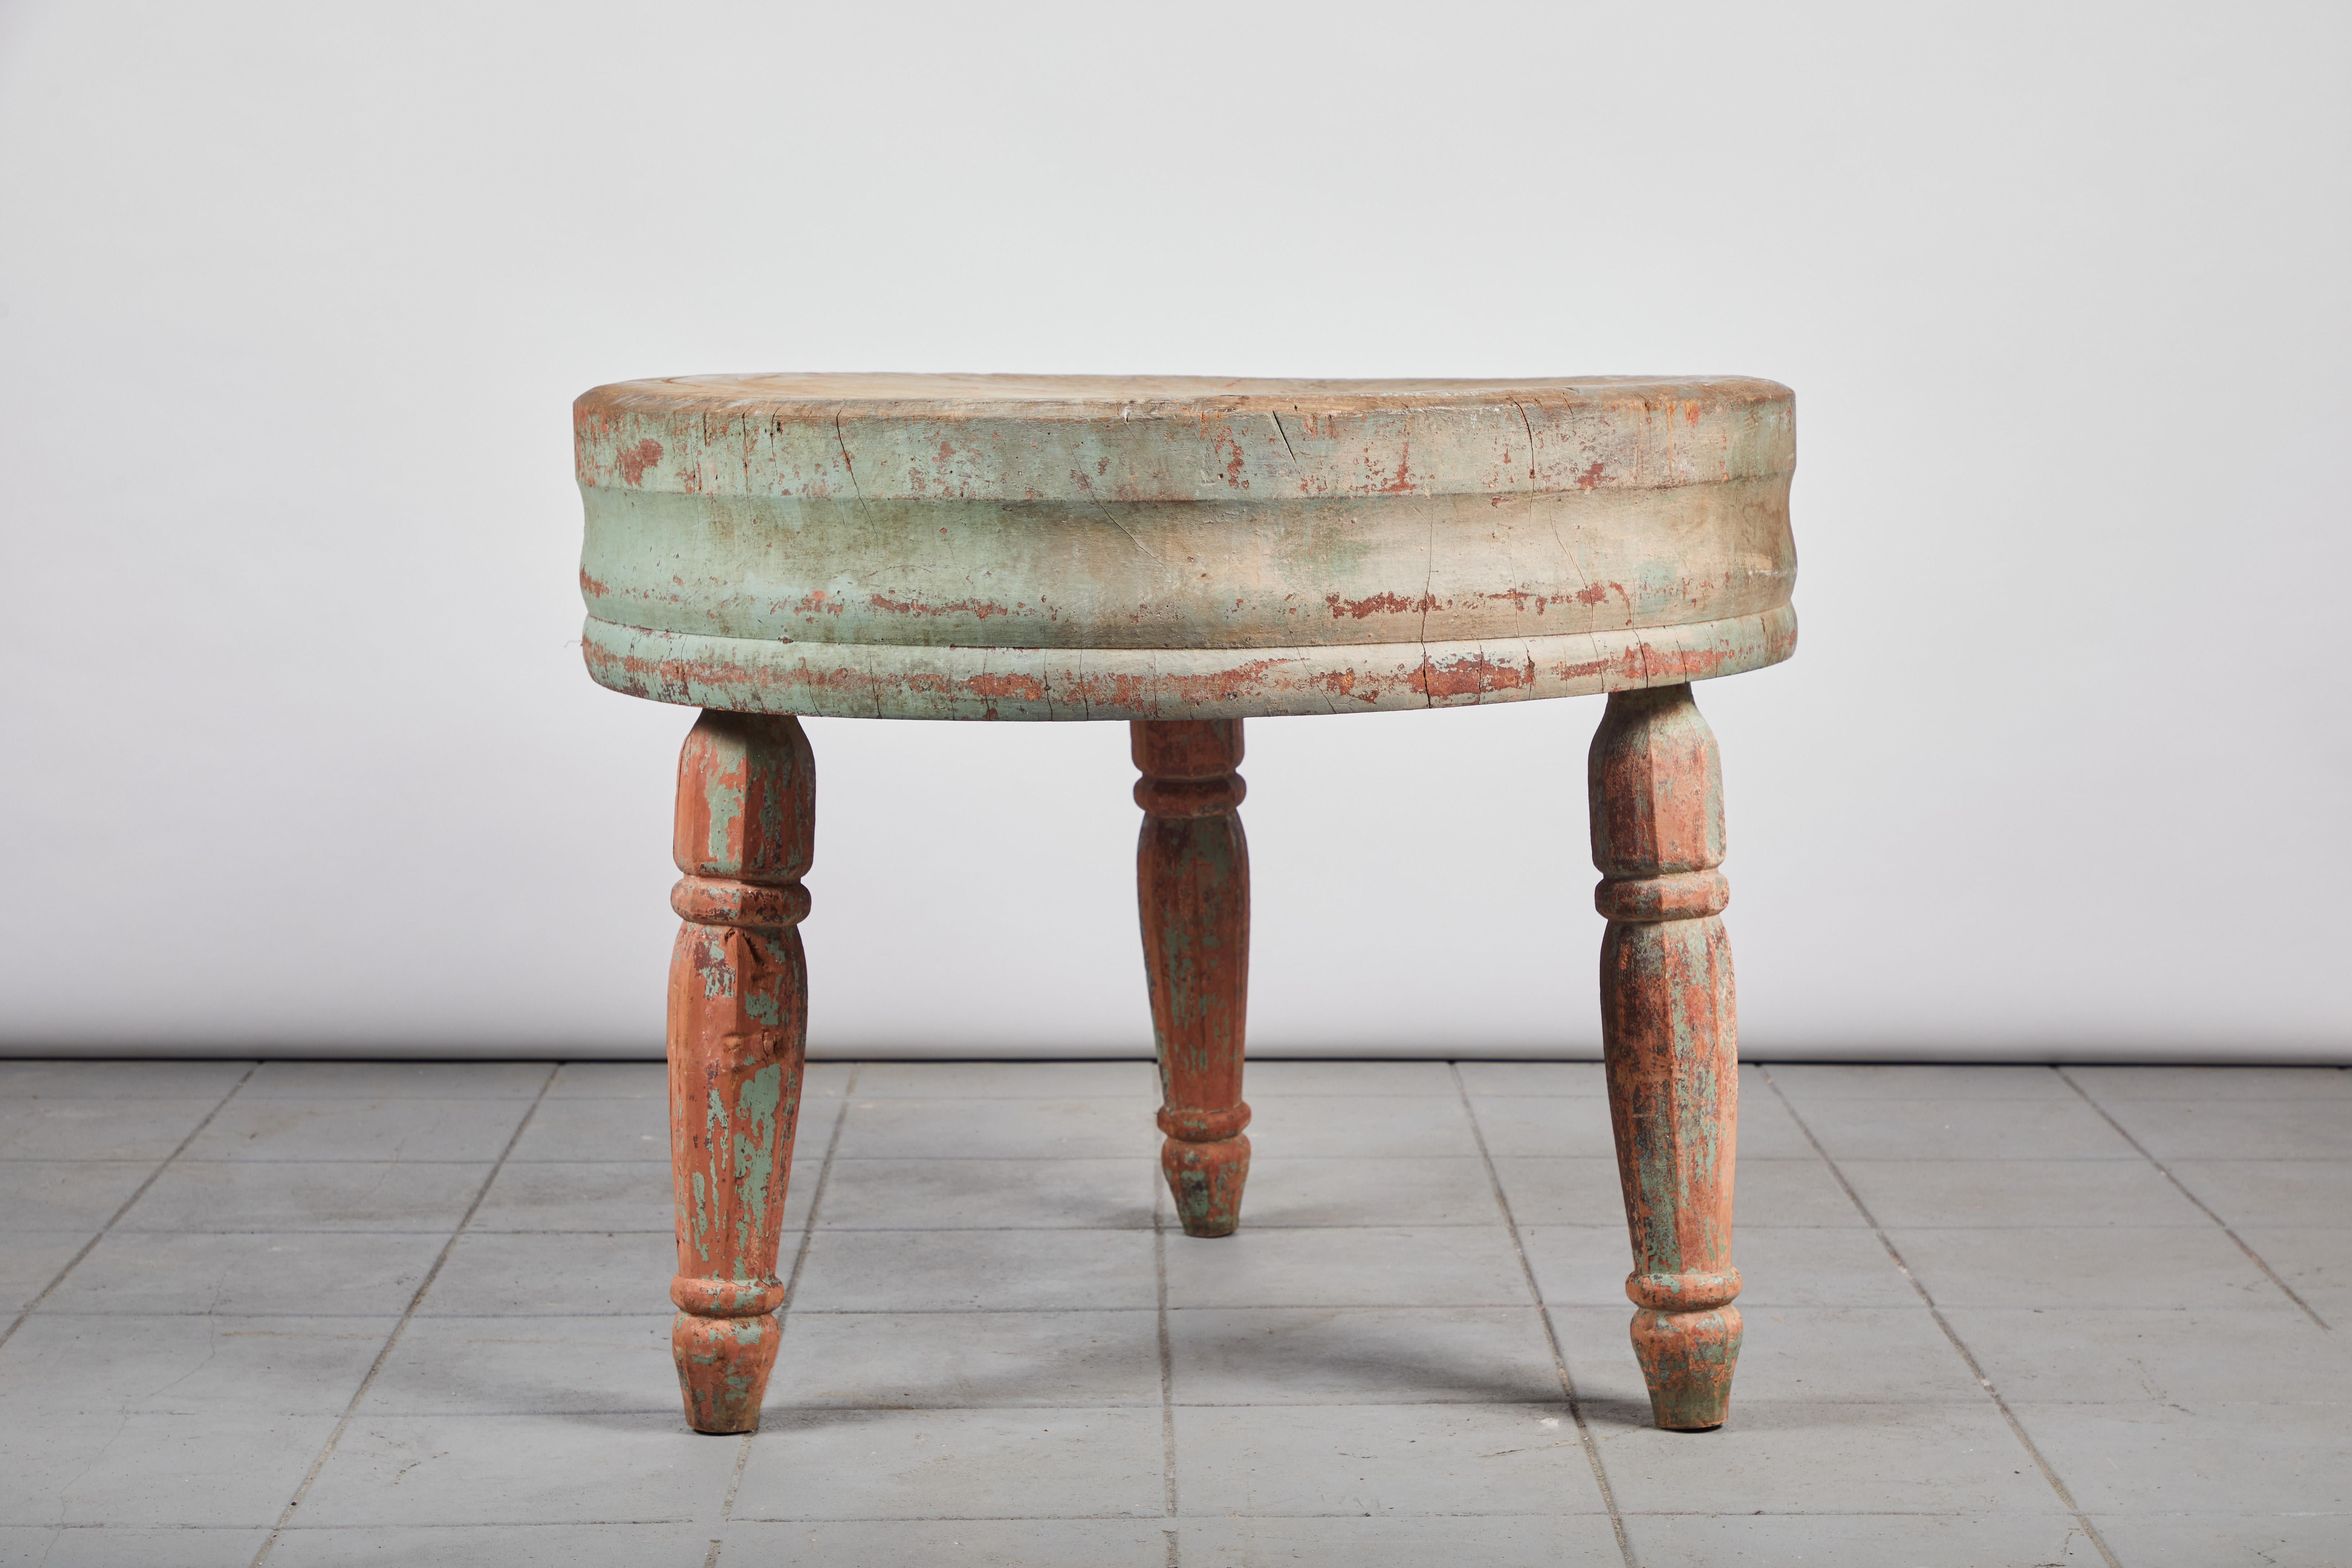 Rustic early American round butcher block table, sits on three legs. Original finish adds to the patina.